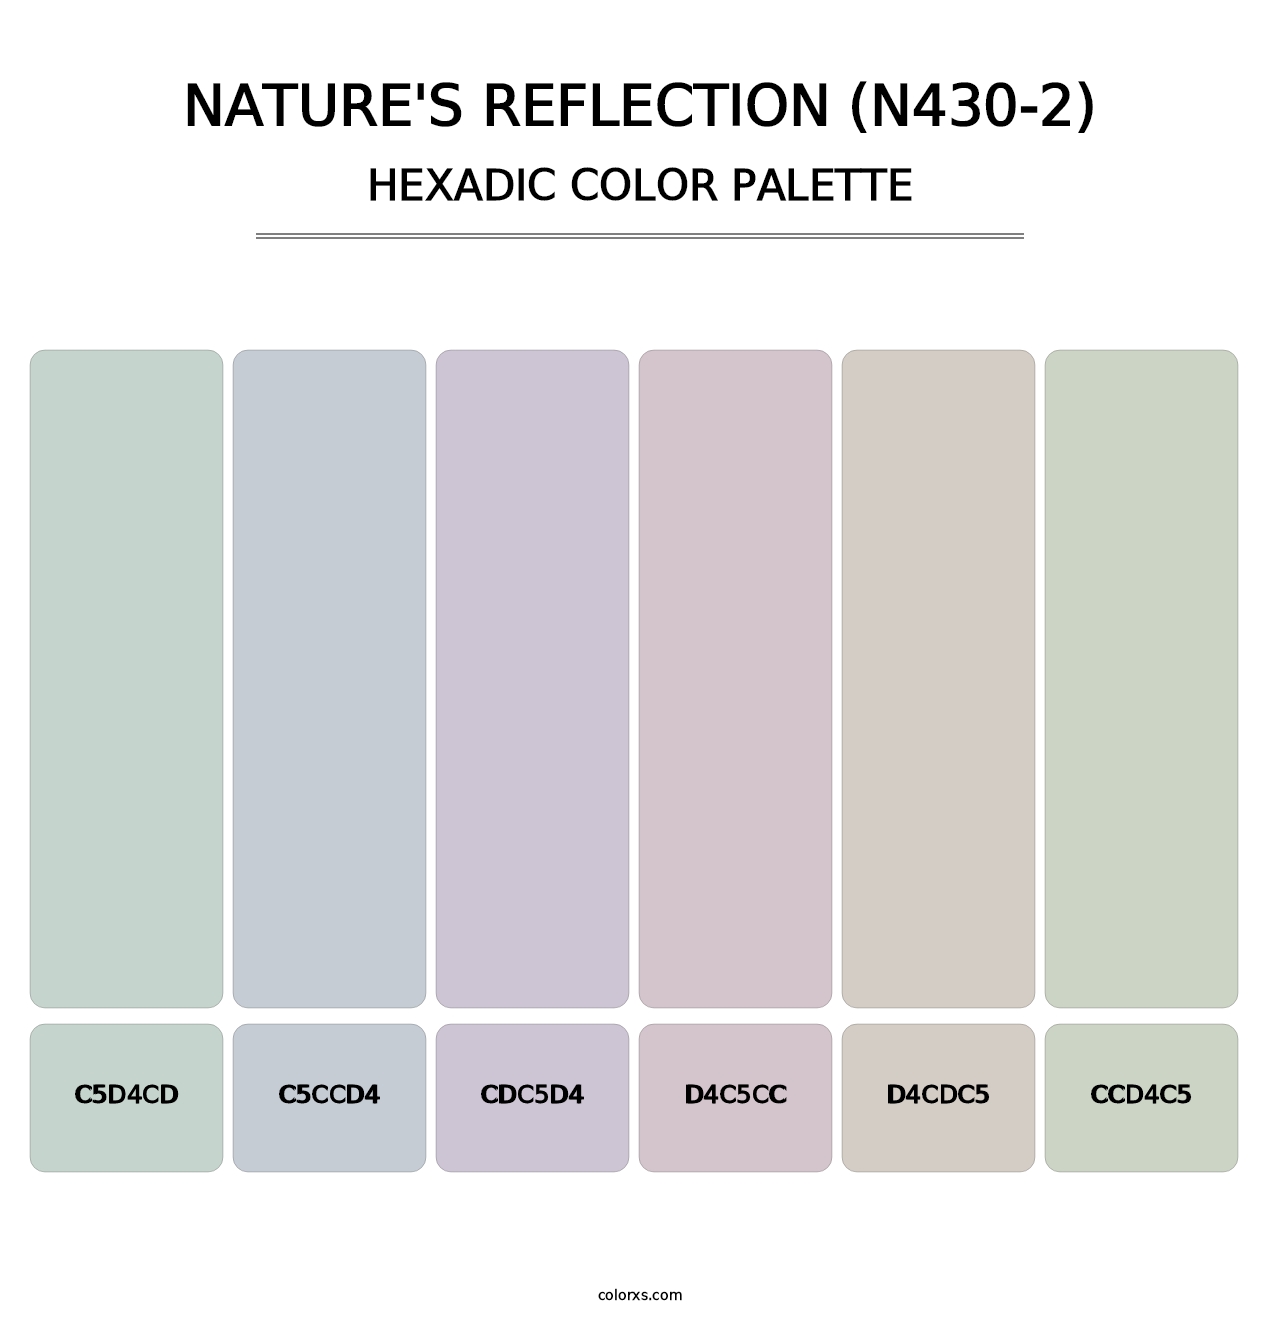 Nature'S Reflection (N430-2) - Hexadic Color Palette